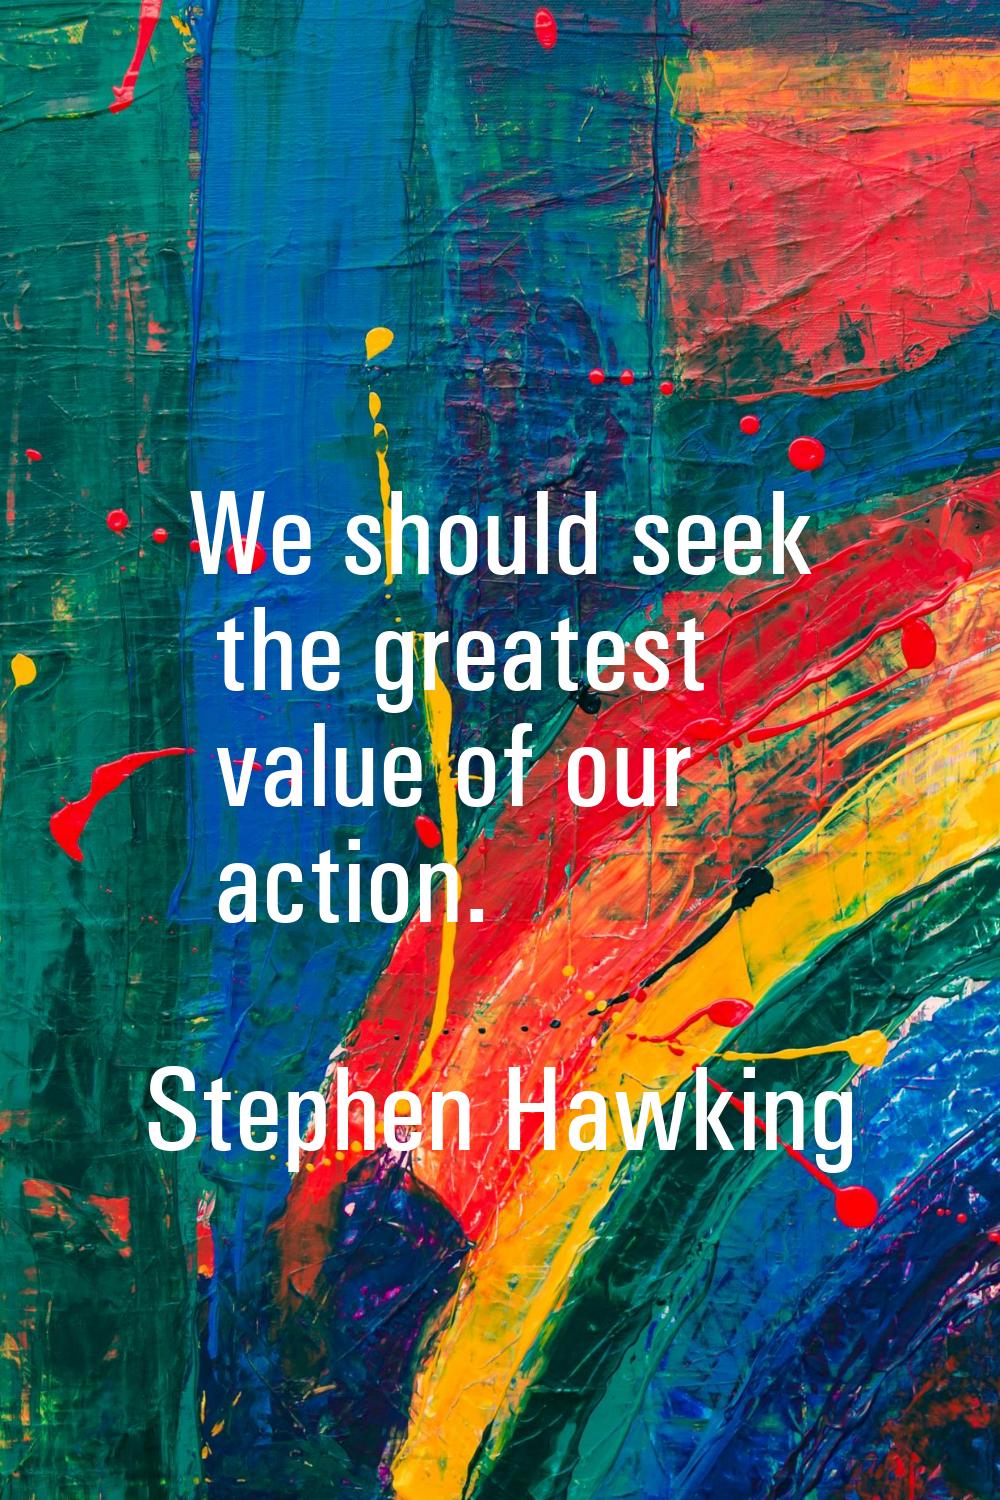 We should seek the greatest value of our action.